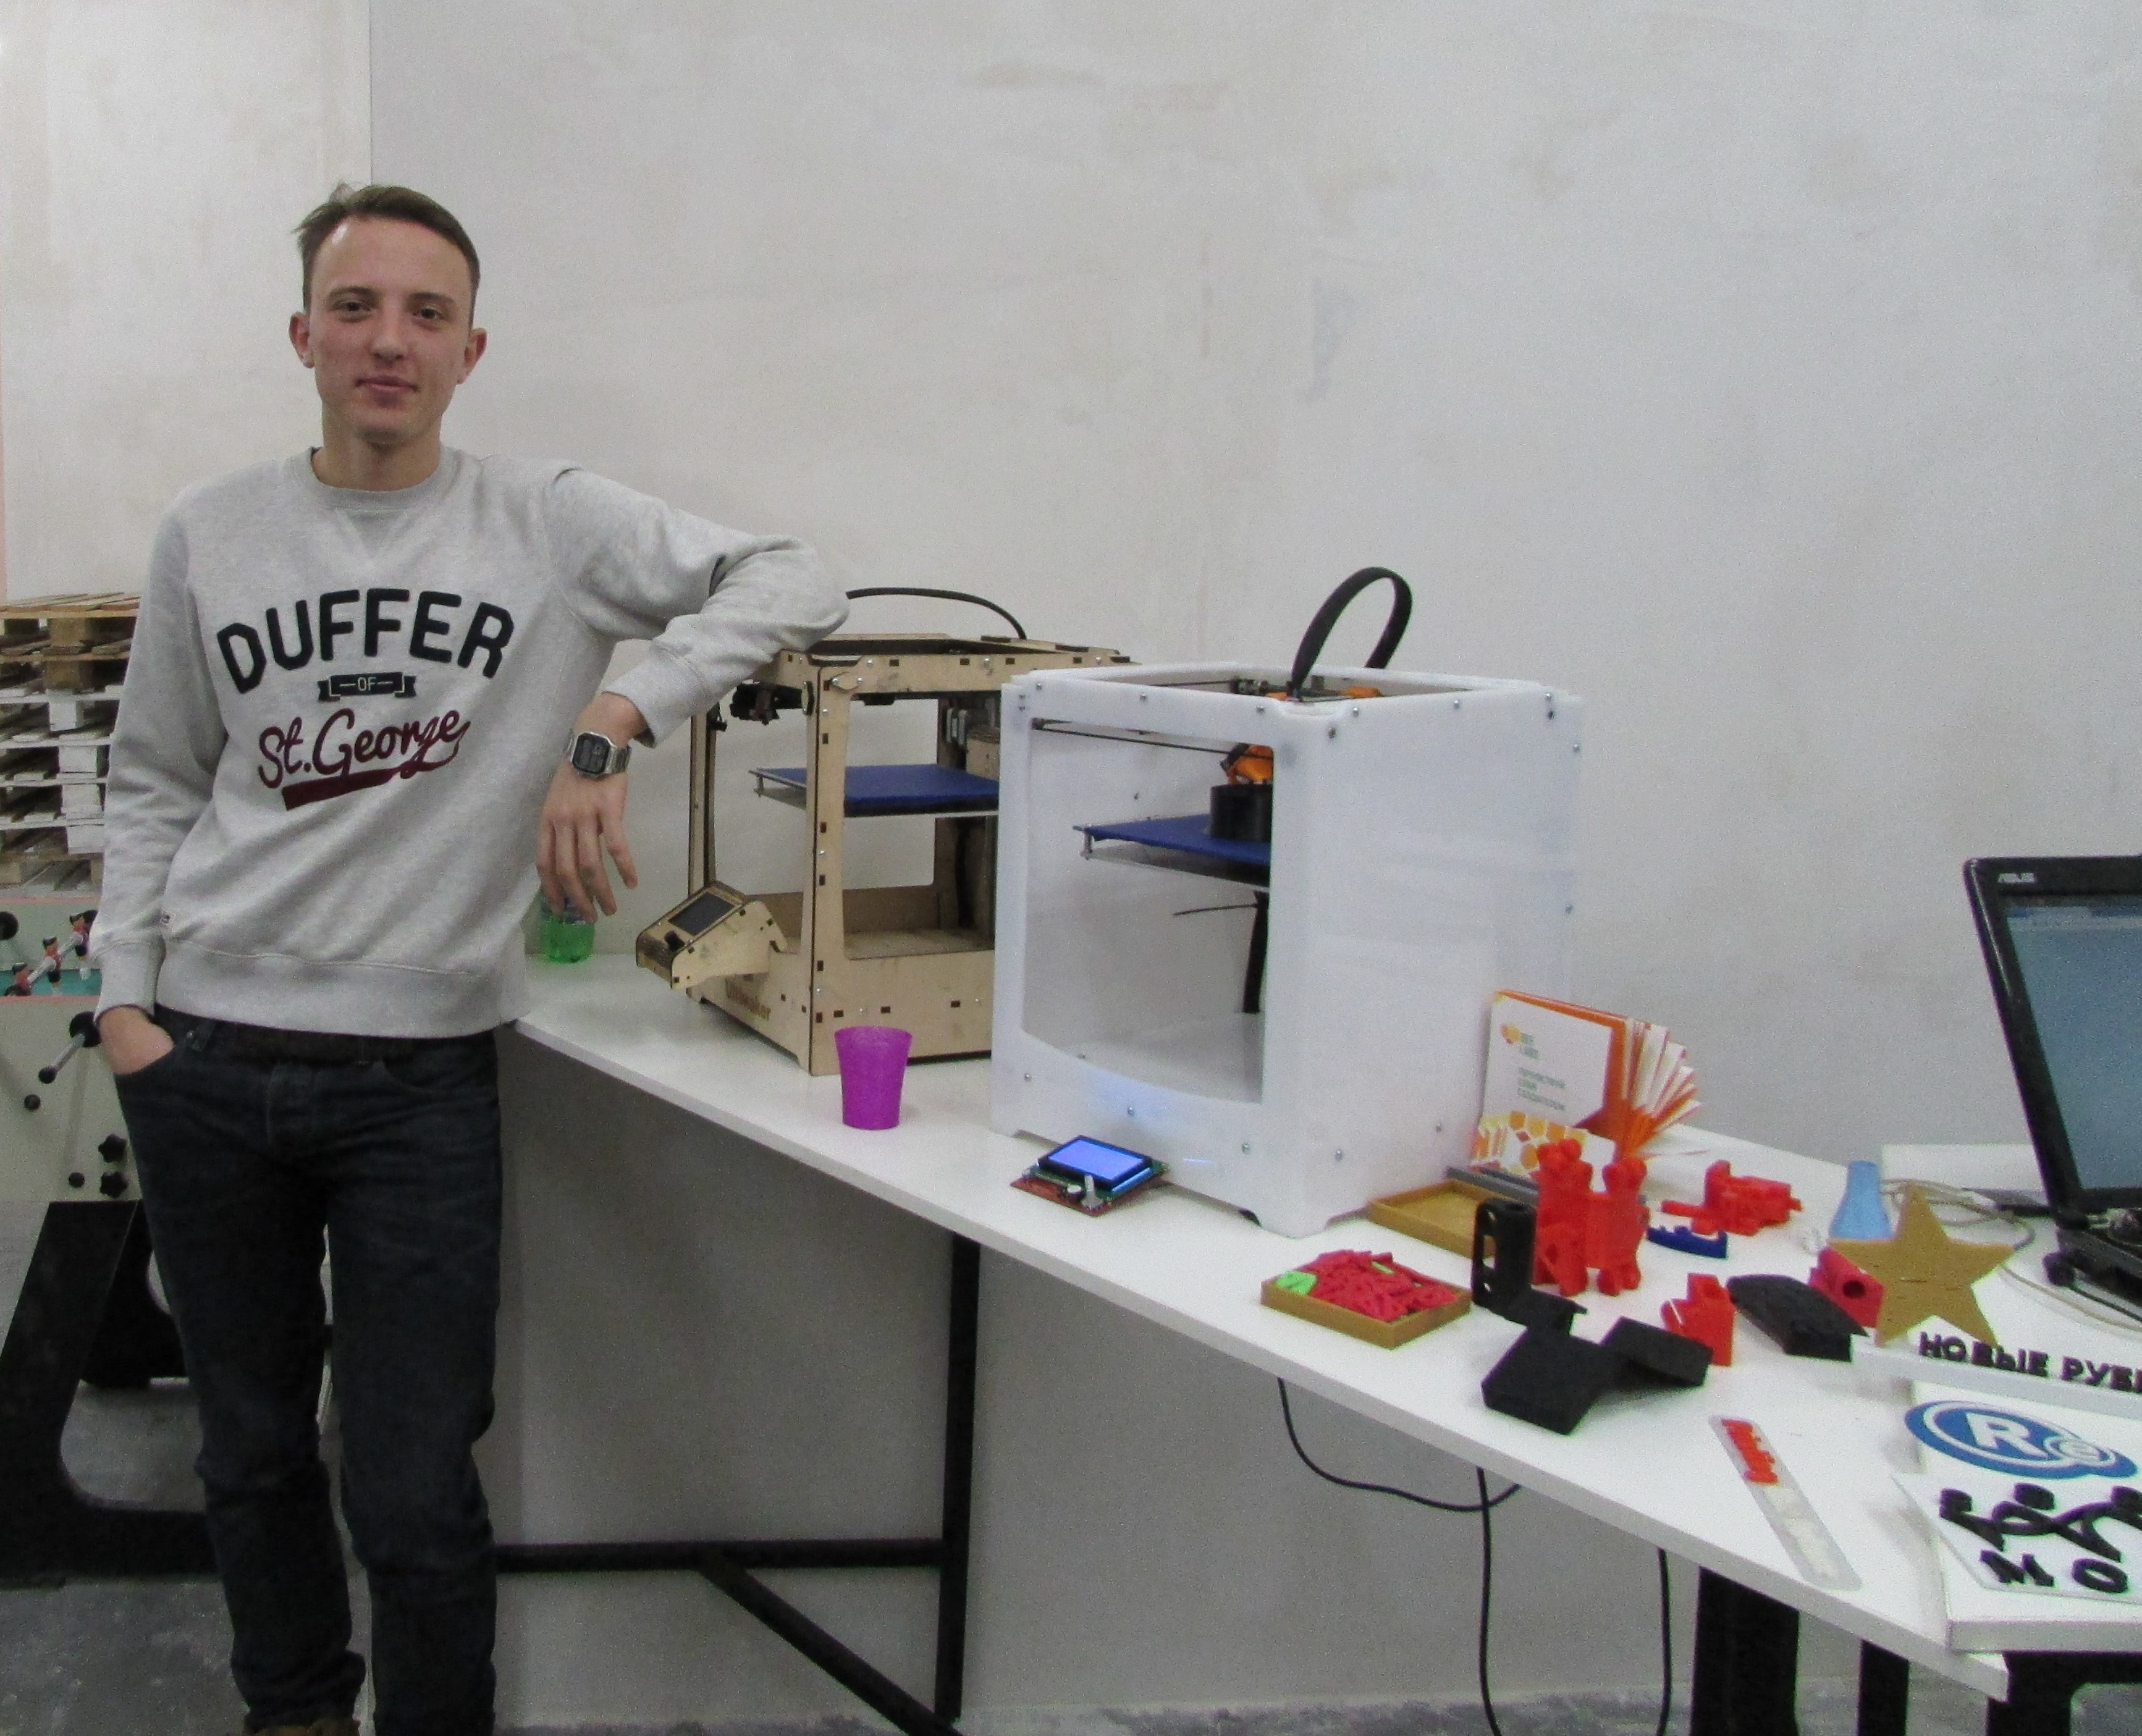  3D  printer  exotica or necessity Interview with one of 